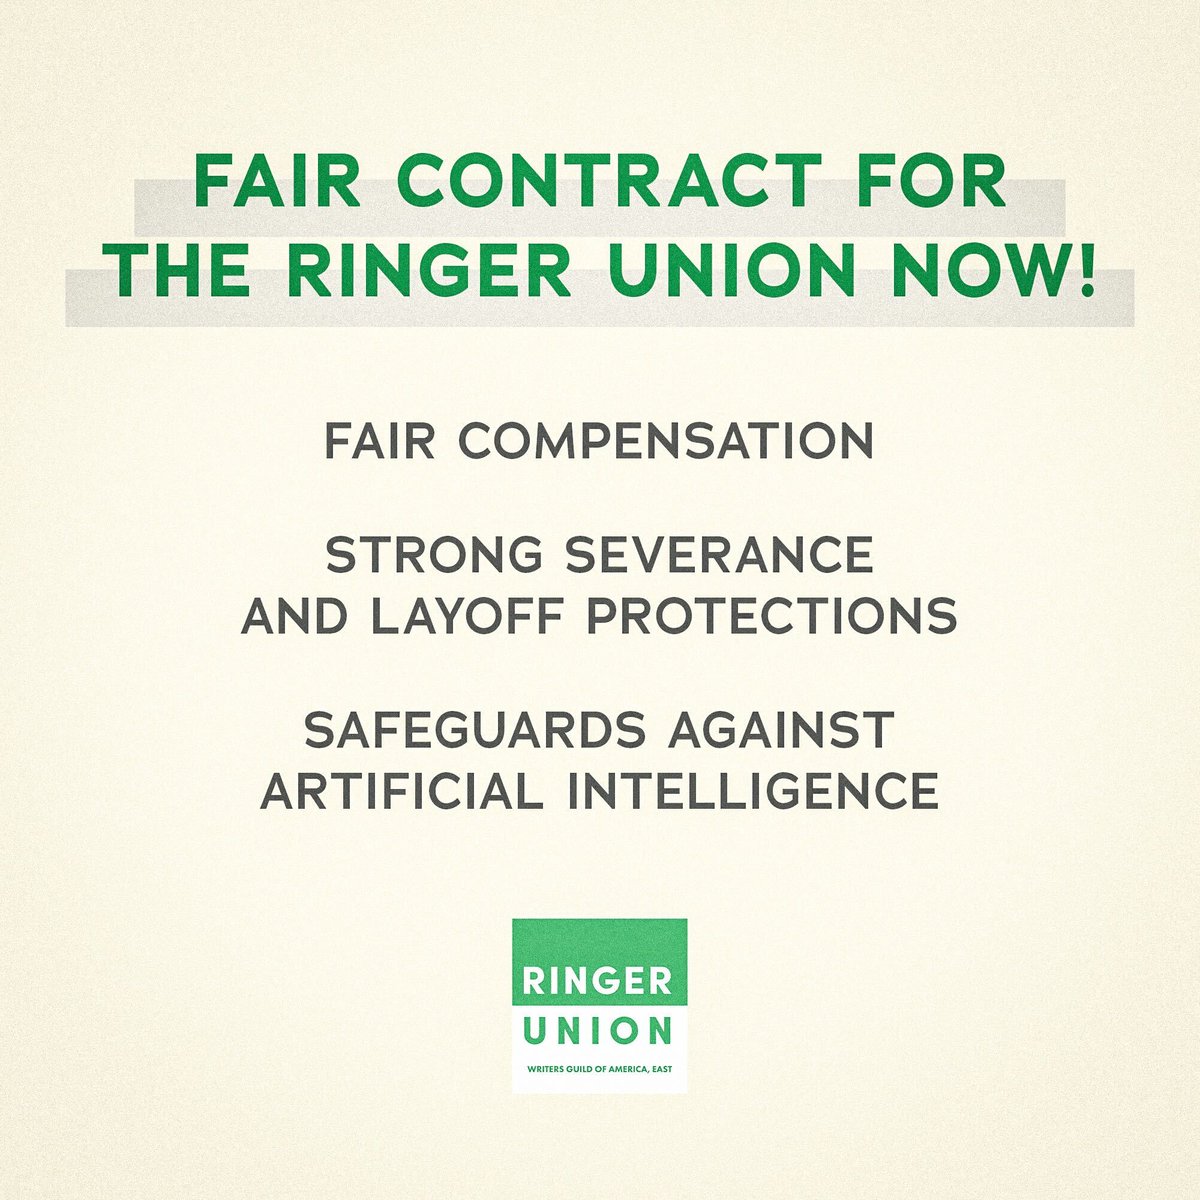 Our union works incredibly hard to make the content that you love — what we're asking for is fair compensation and security to continue doing what we do best. Today (!) is the last scheduled day of bargaining before our contract expires. Fair contract now!